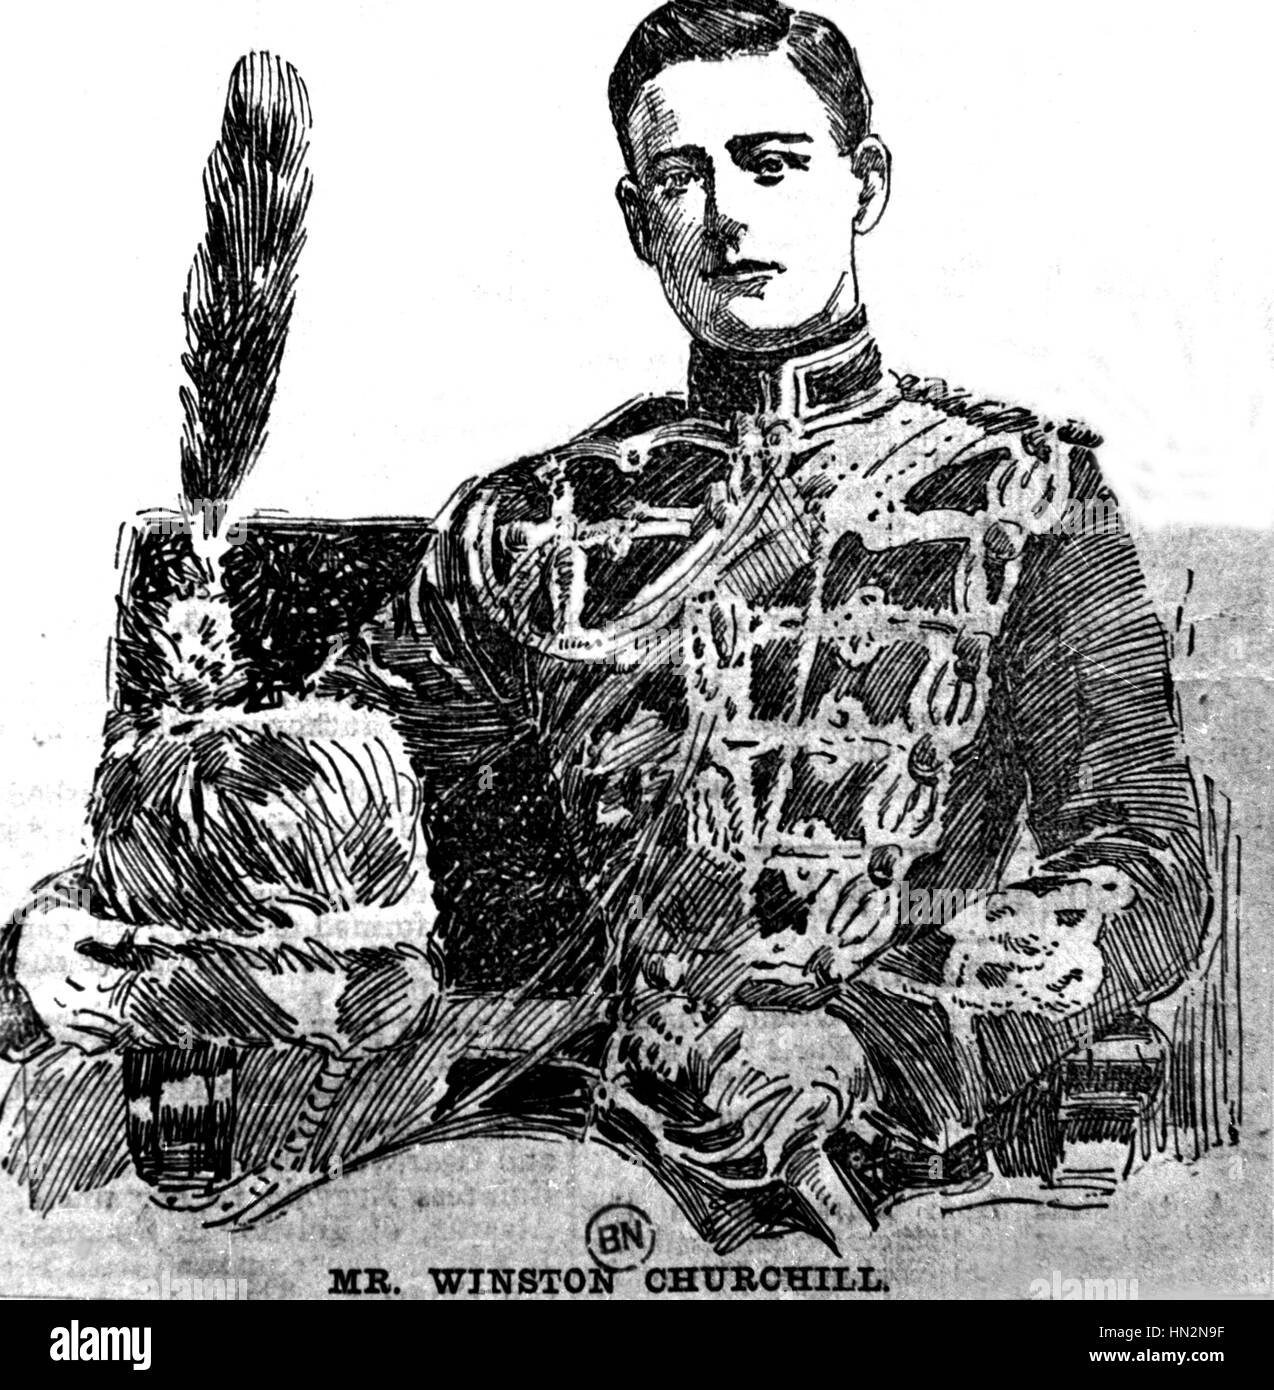 Winston Churchill as a young man wearingthe uniform of second lieutenant in the 4th Queen's Own Hussars. February 1895 Engraving after a photograph Stock Photo